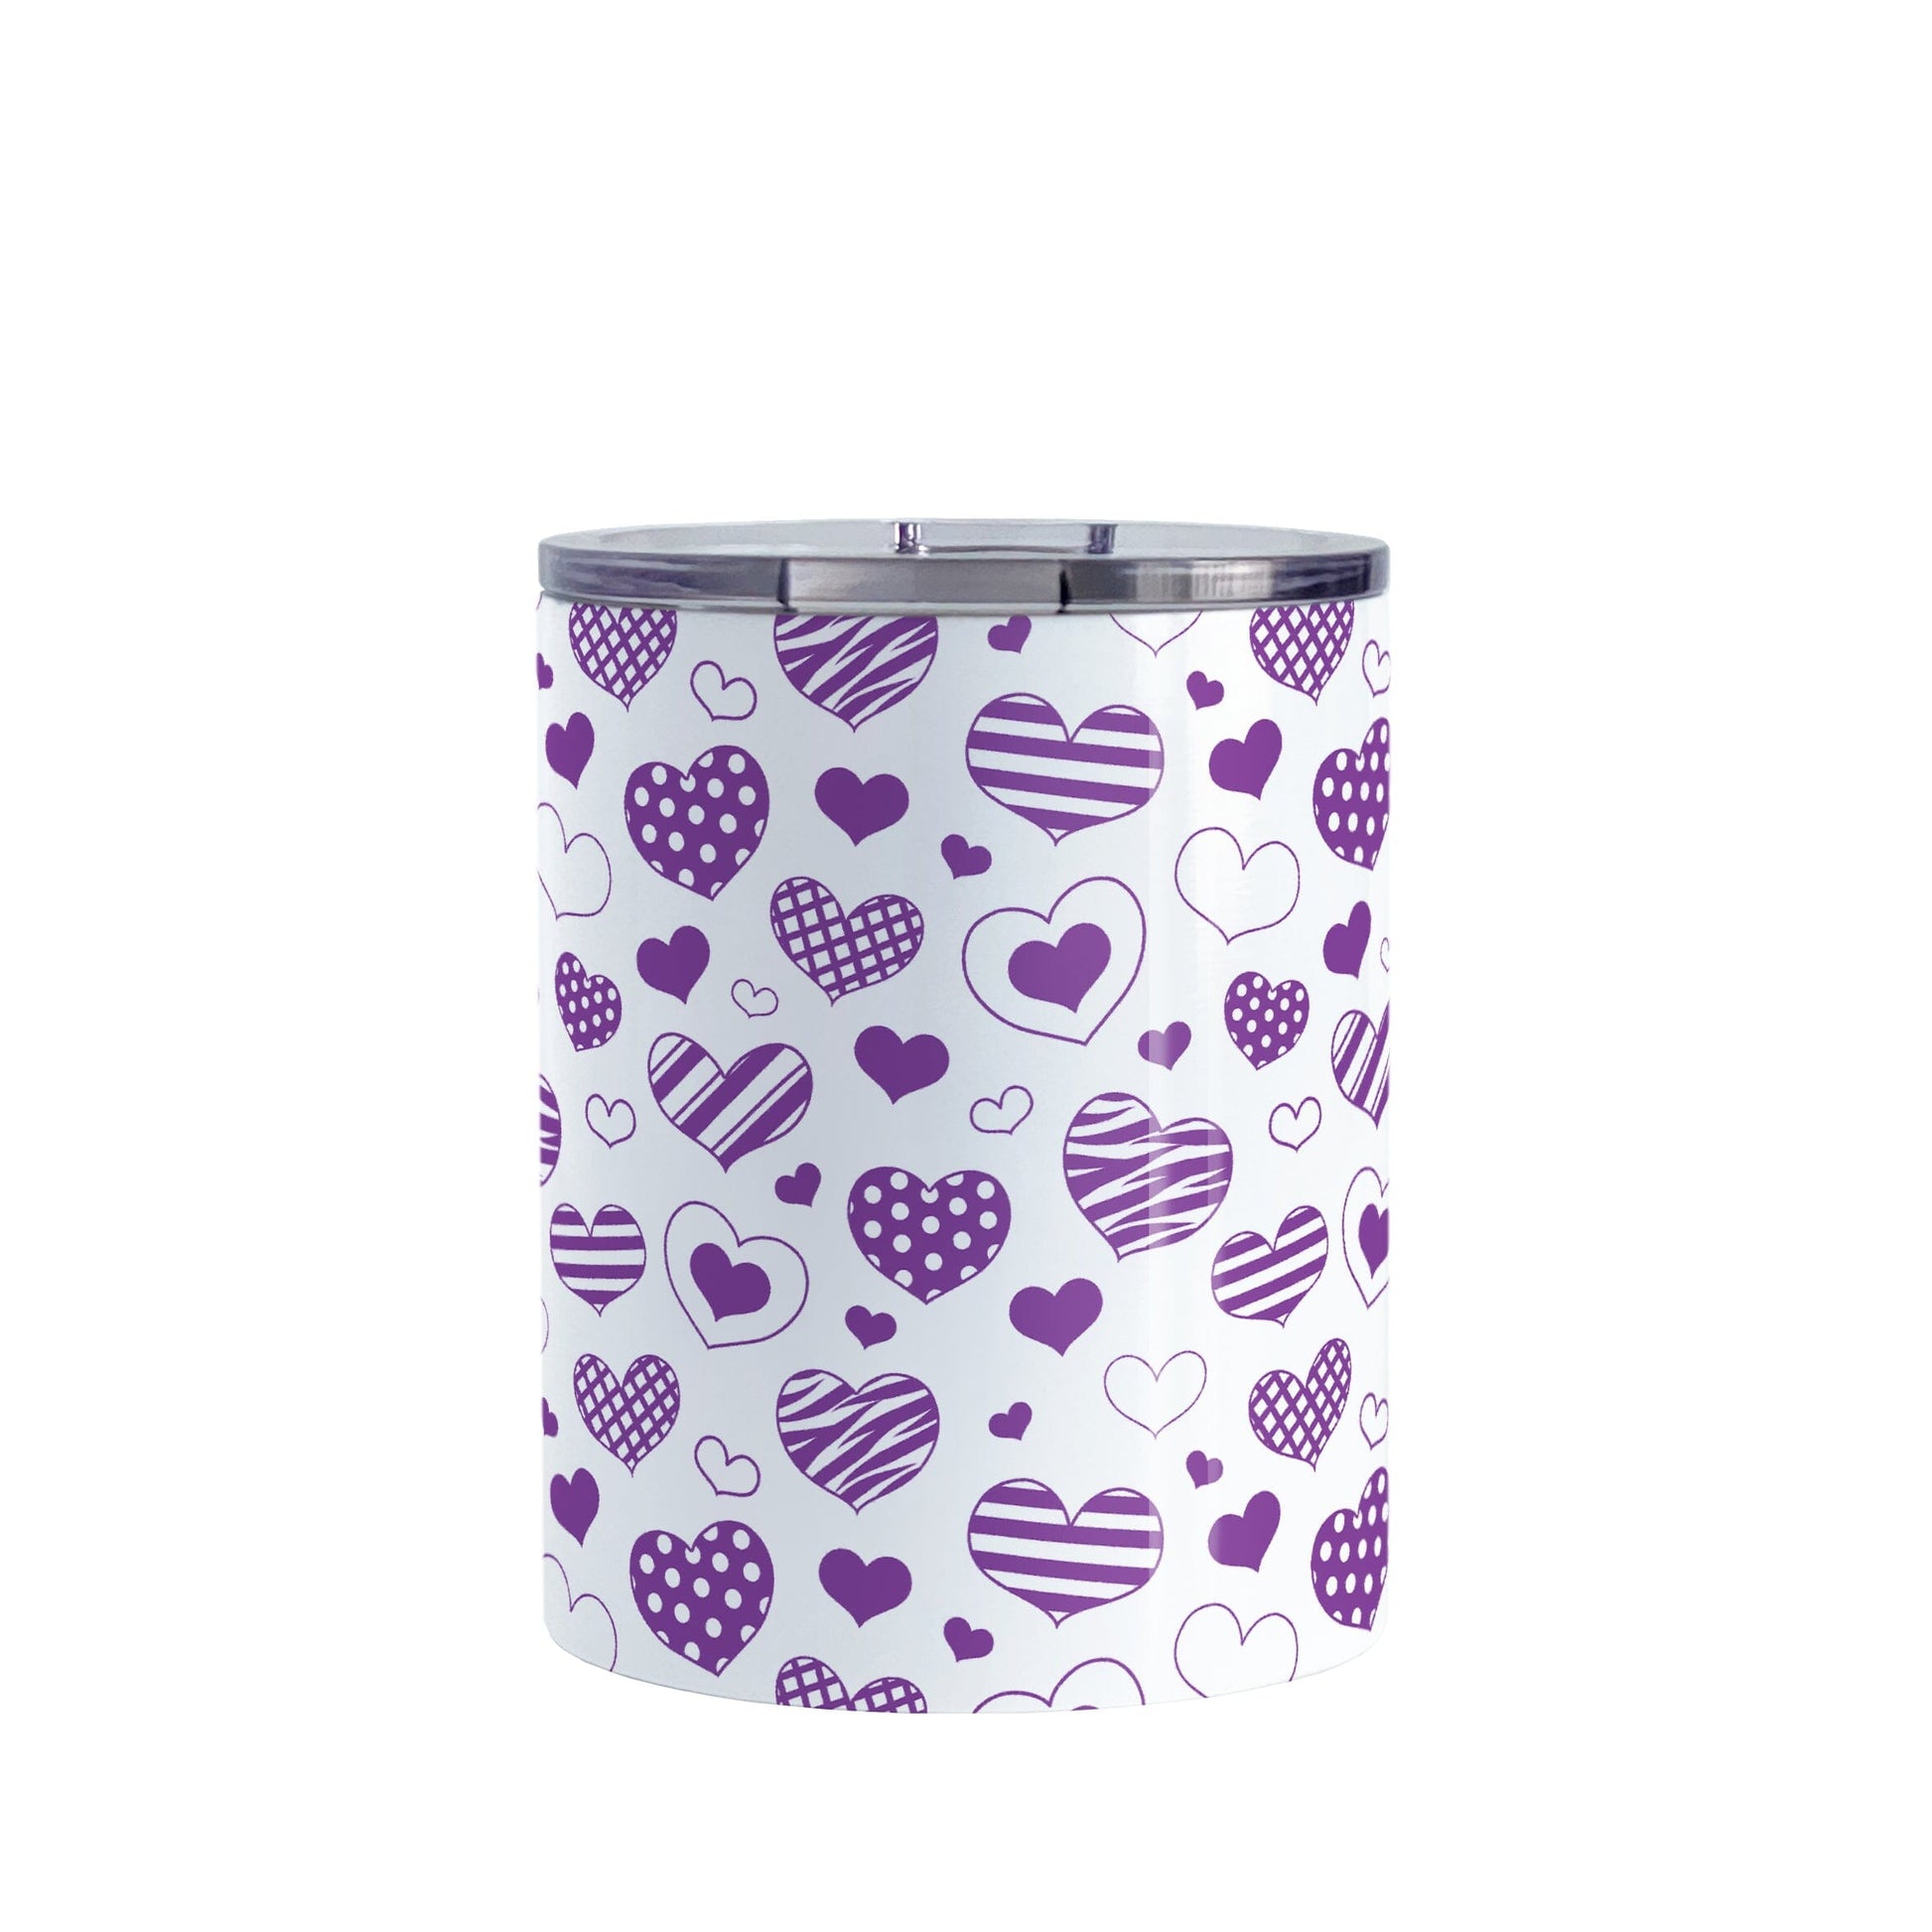 Purple Heart Doodles Tumbler Cup (10oz) at Amy's Coffee Mugs. A stainless steel tumbler cup designed with a print of hand-drawn purple heart doodles in a pattern that wraps around the cup. This cute heart pattern is perfect for Valentine's Day or for anyone who loves hearts and young-at-heart drawings. 